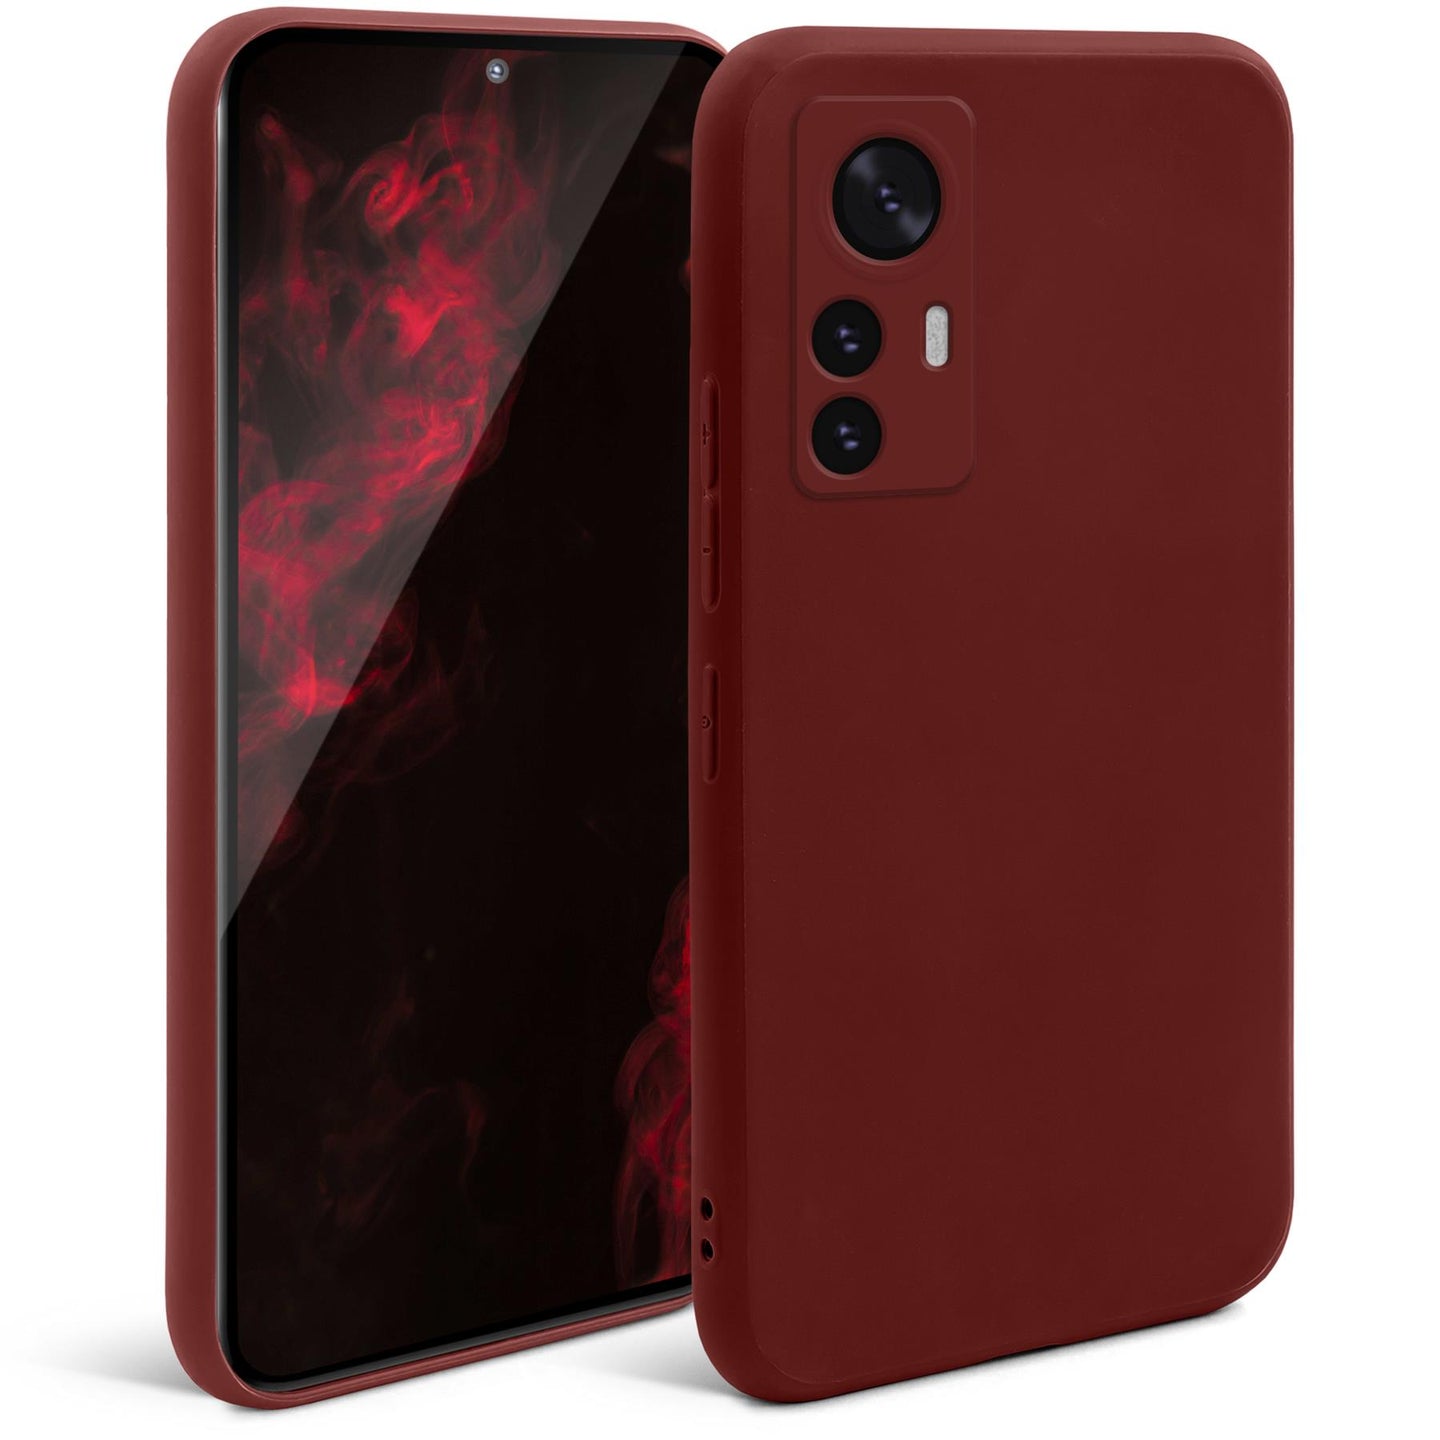 Moozy Minimalist Series Silicone Case for Xiaomi 12 Pro, Wine Red - Matte Finish Lightweight Mobile Phone Case Slim Soft Protective TPU Cover with Matte Surface